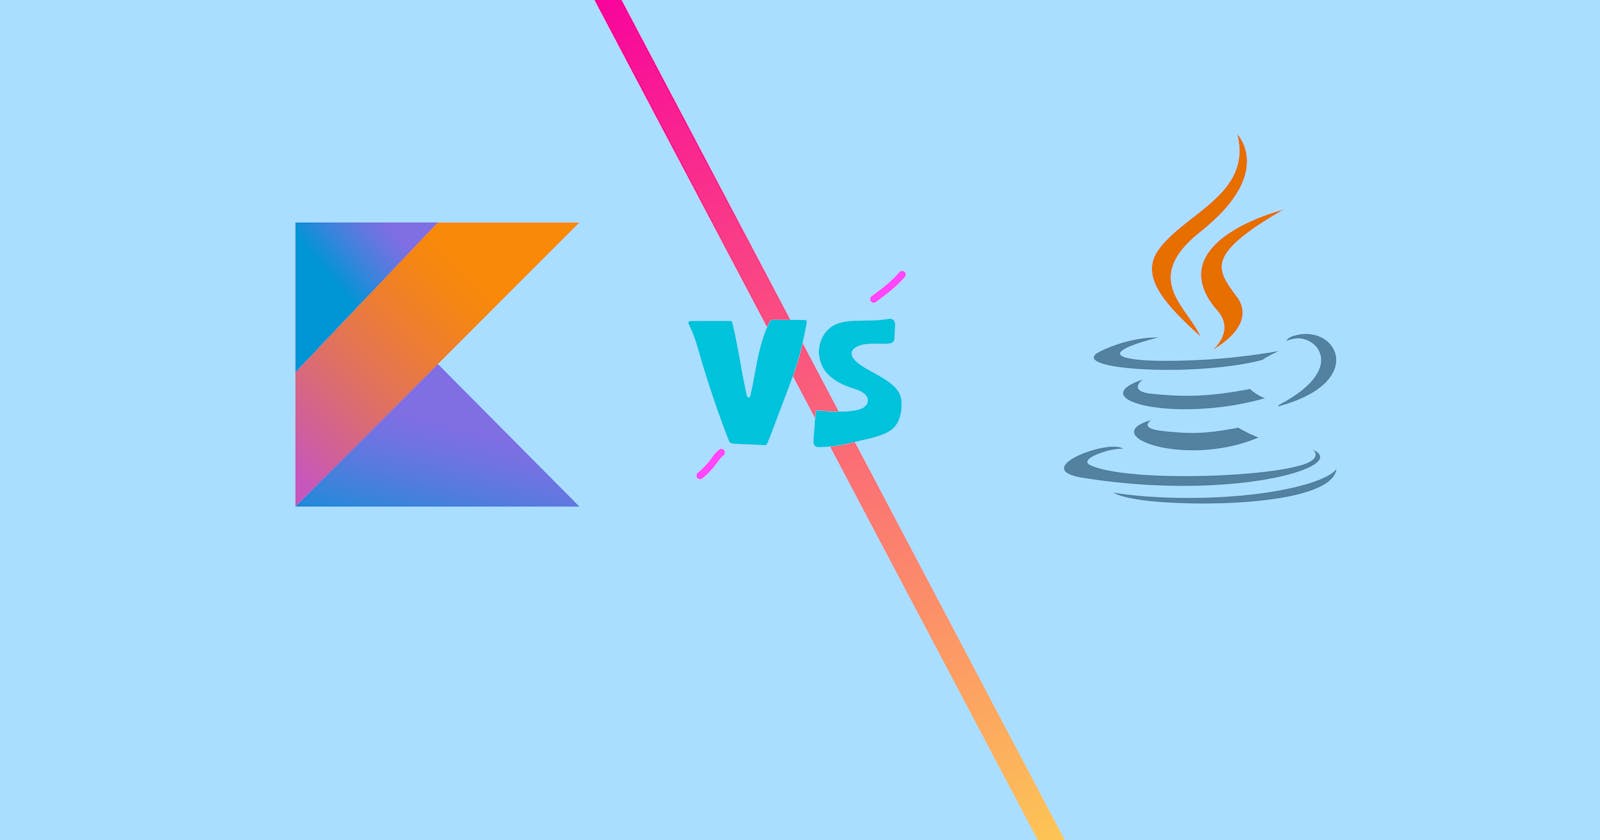 Why Kotlin over Java for Android Development?